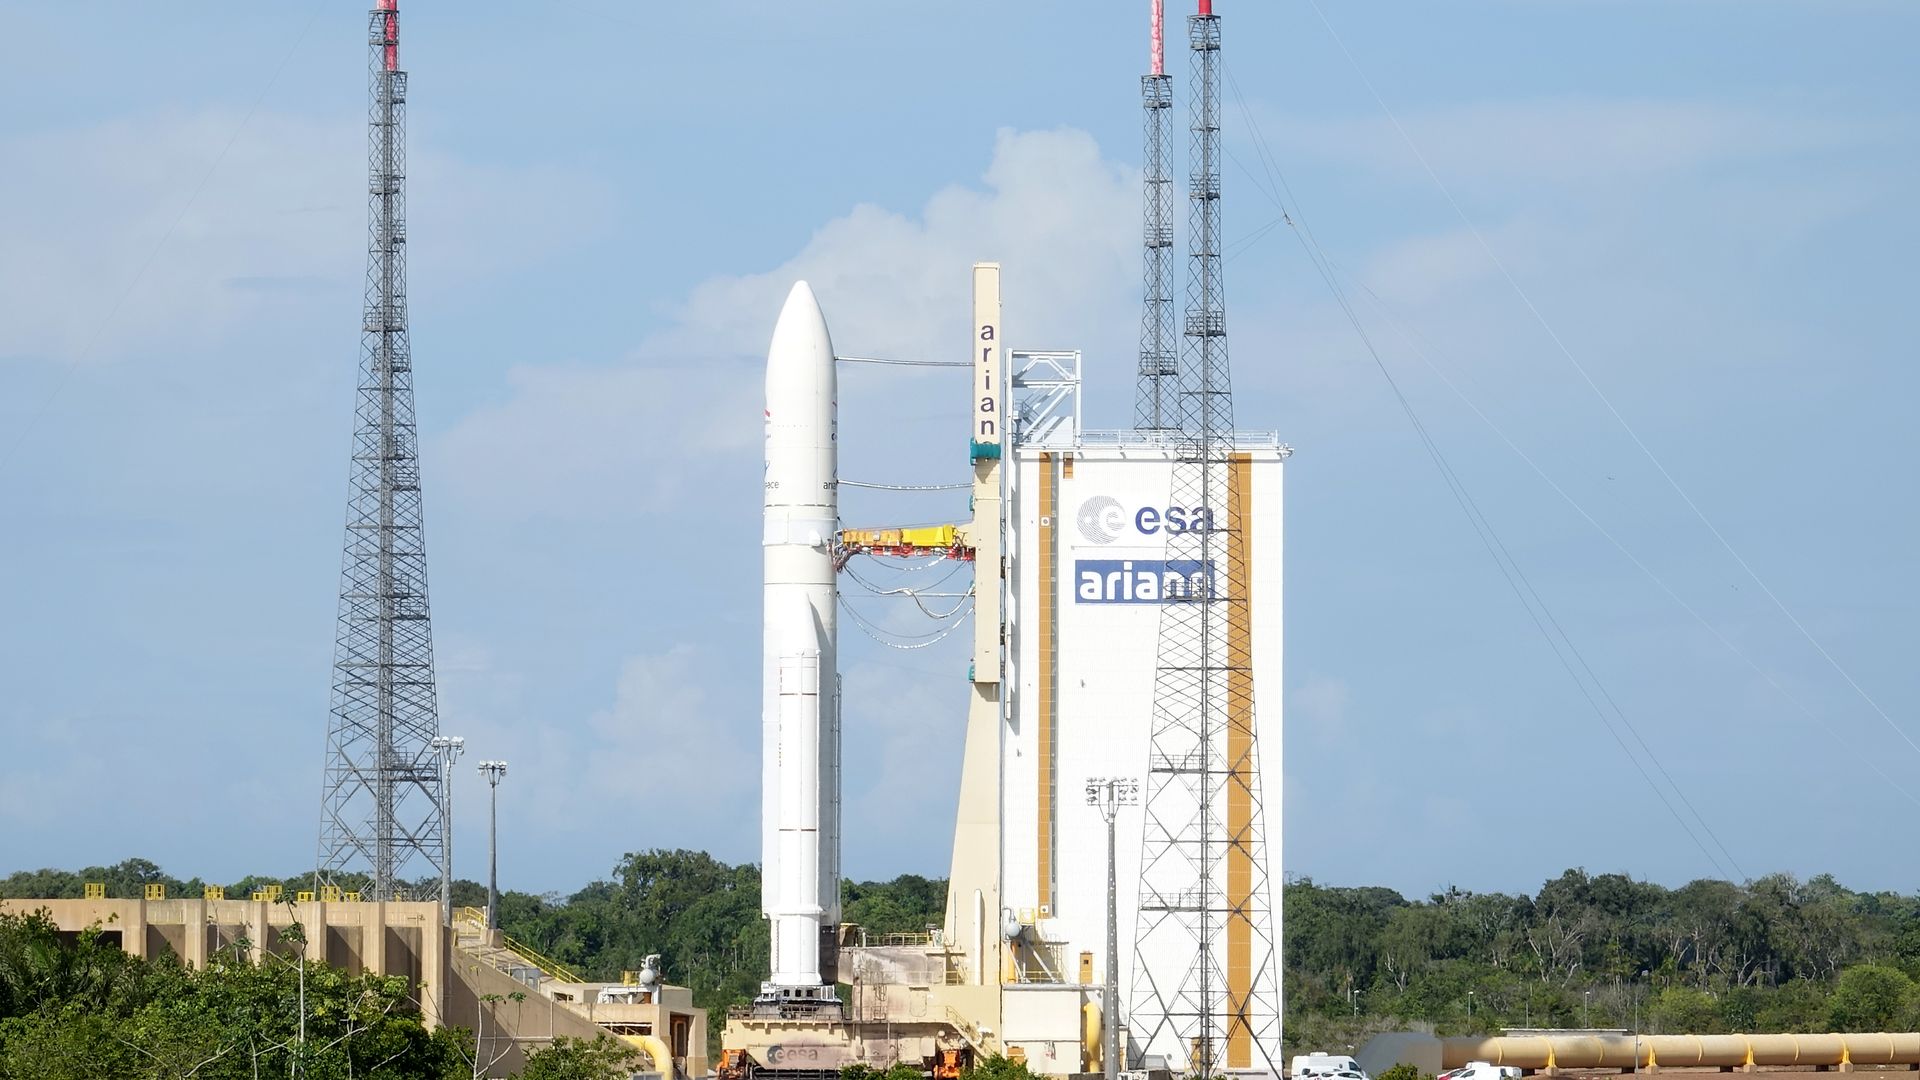 The Ariane 5 launch vehicle with the BepiColombo space probe on board is about to launch at the Kourou spaceport.